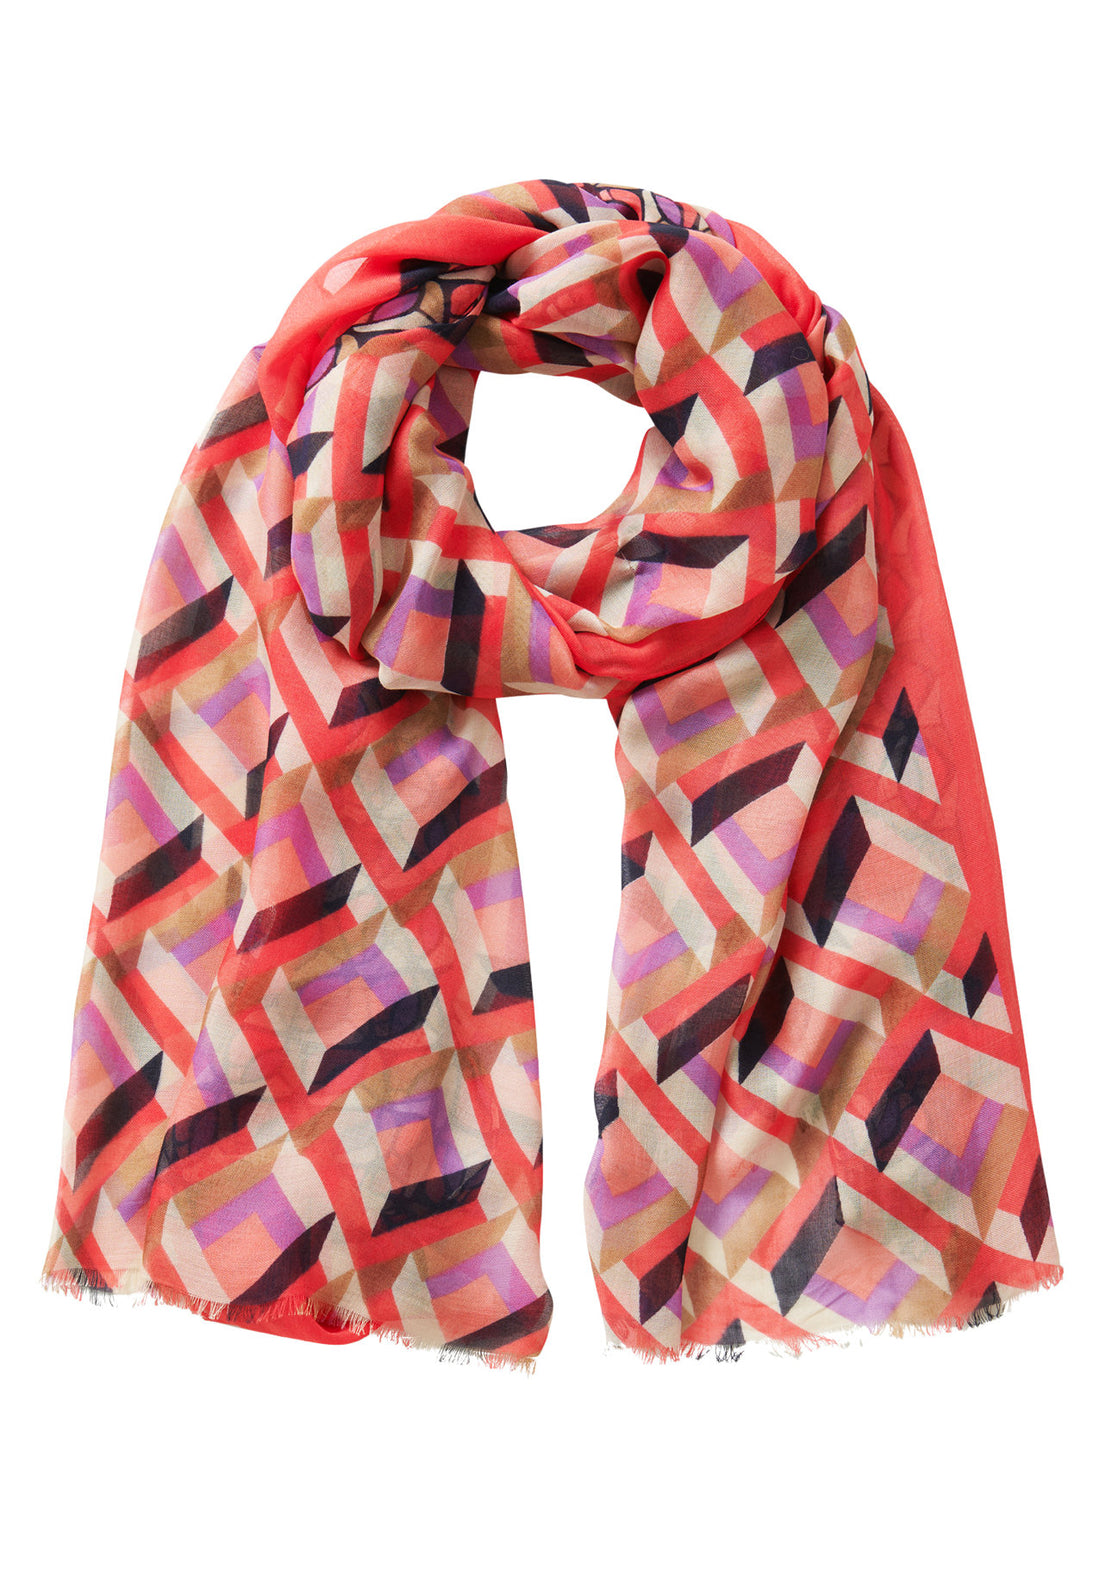 Printed Woven Scarf_3406 2558_4868_01